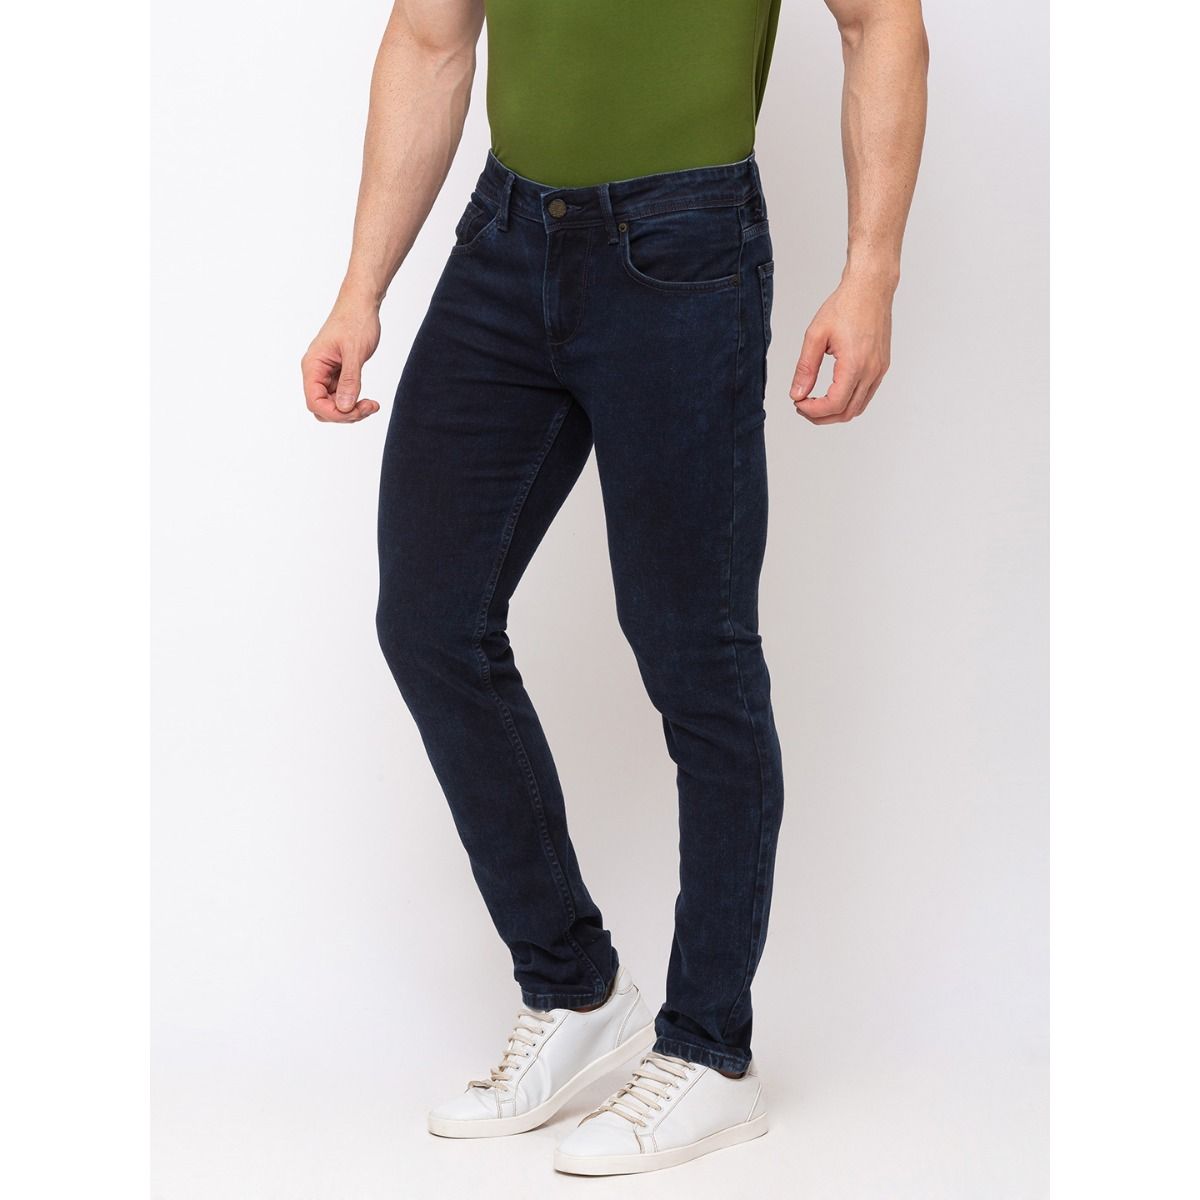 Regular Fit Party Wear Basic Denim Jeans For Mens at Rs 370/piece in Indore